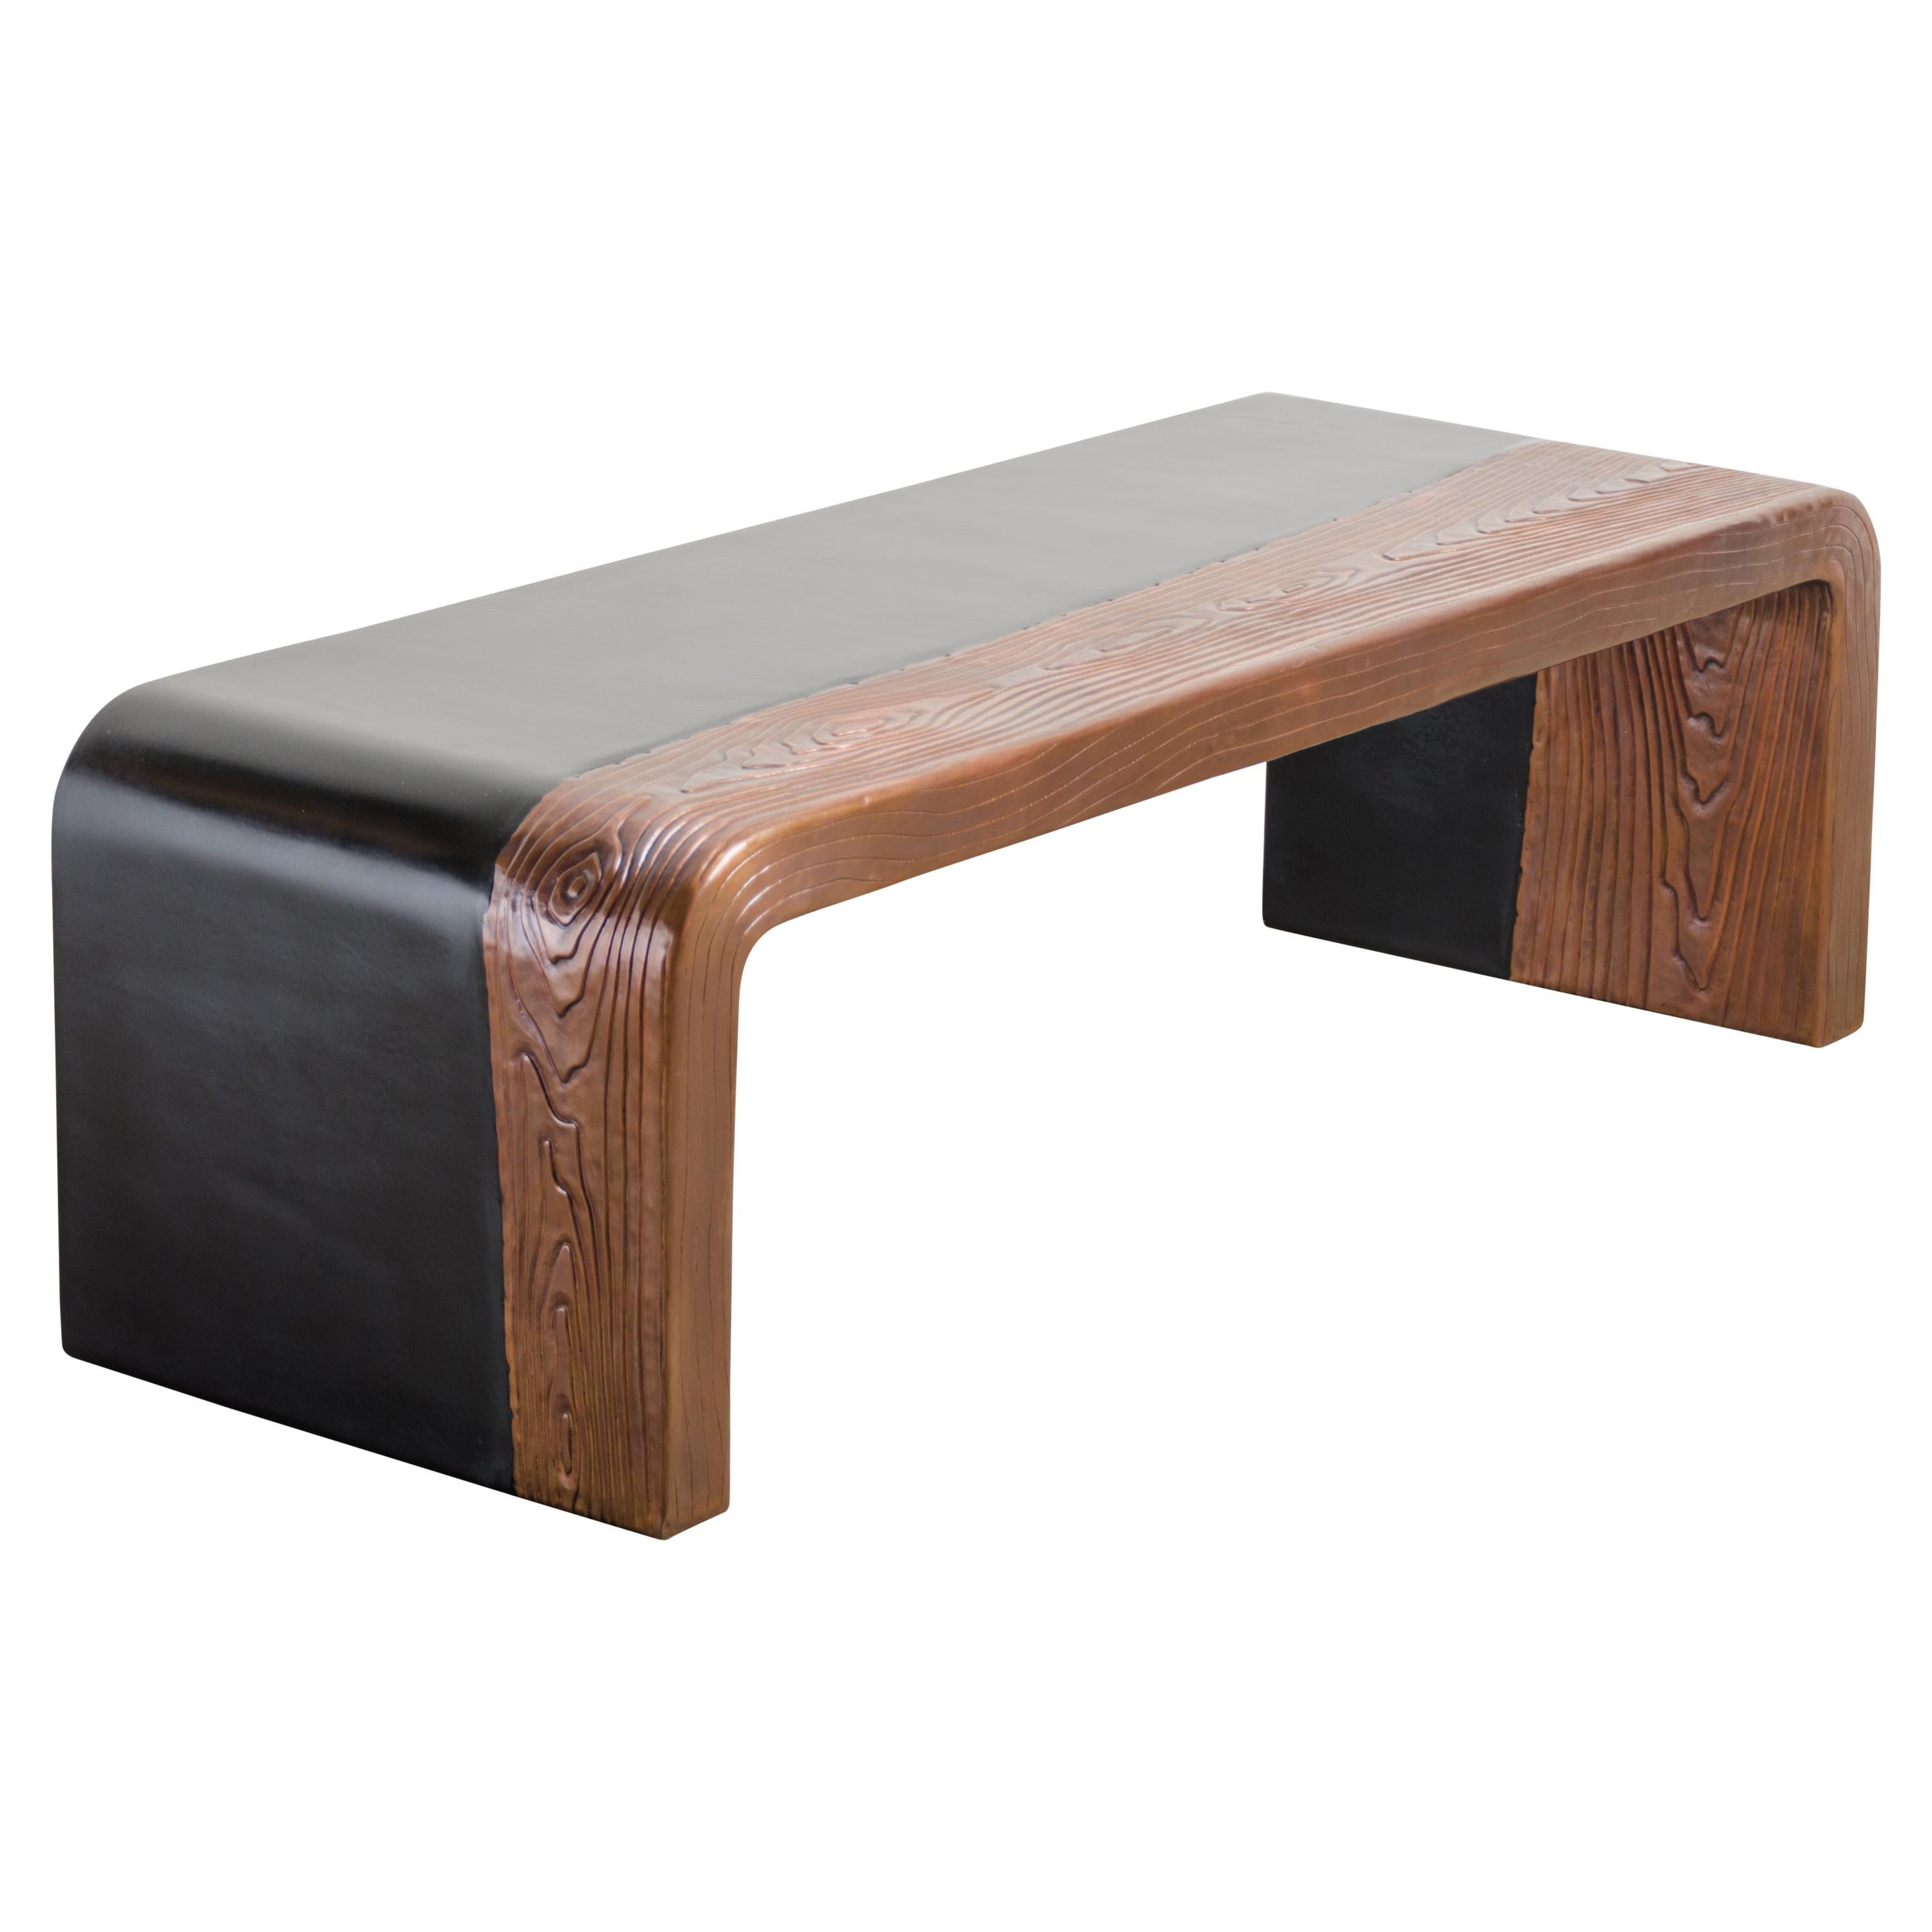 Woodgrain with Lacquer Bench by Robert Kuo, Hand Repousse, Limited Edition